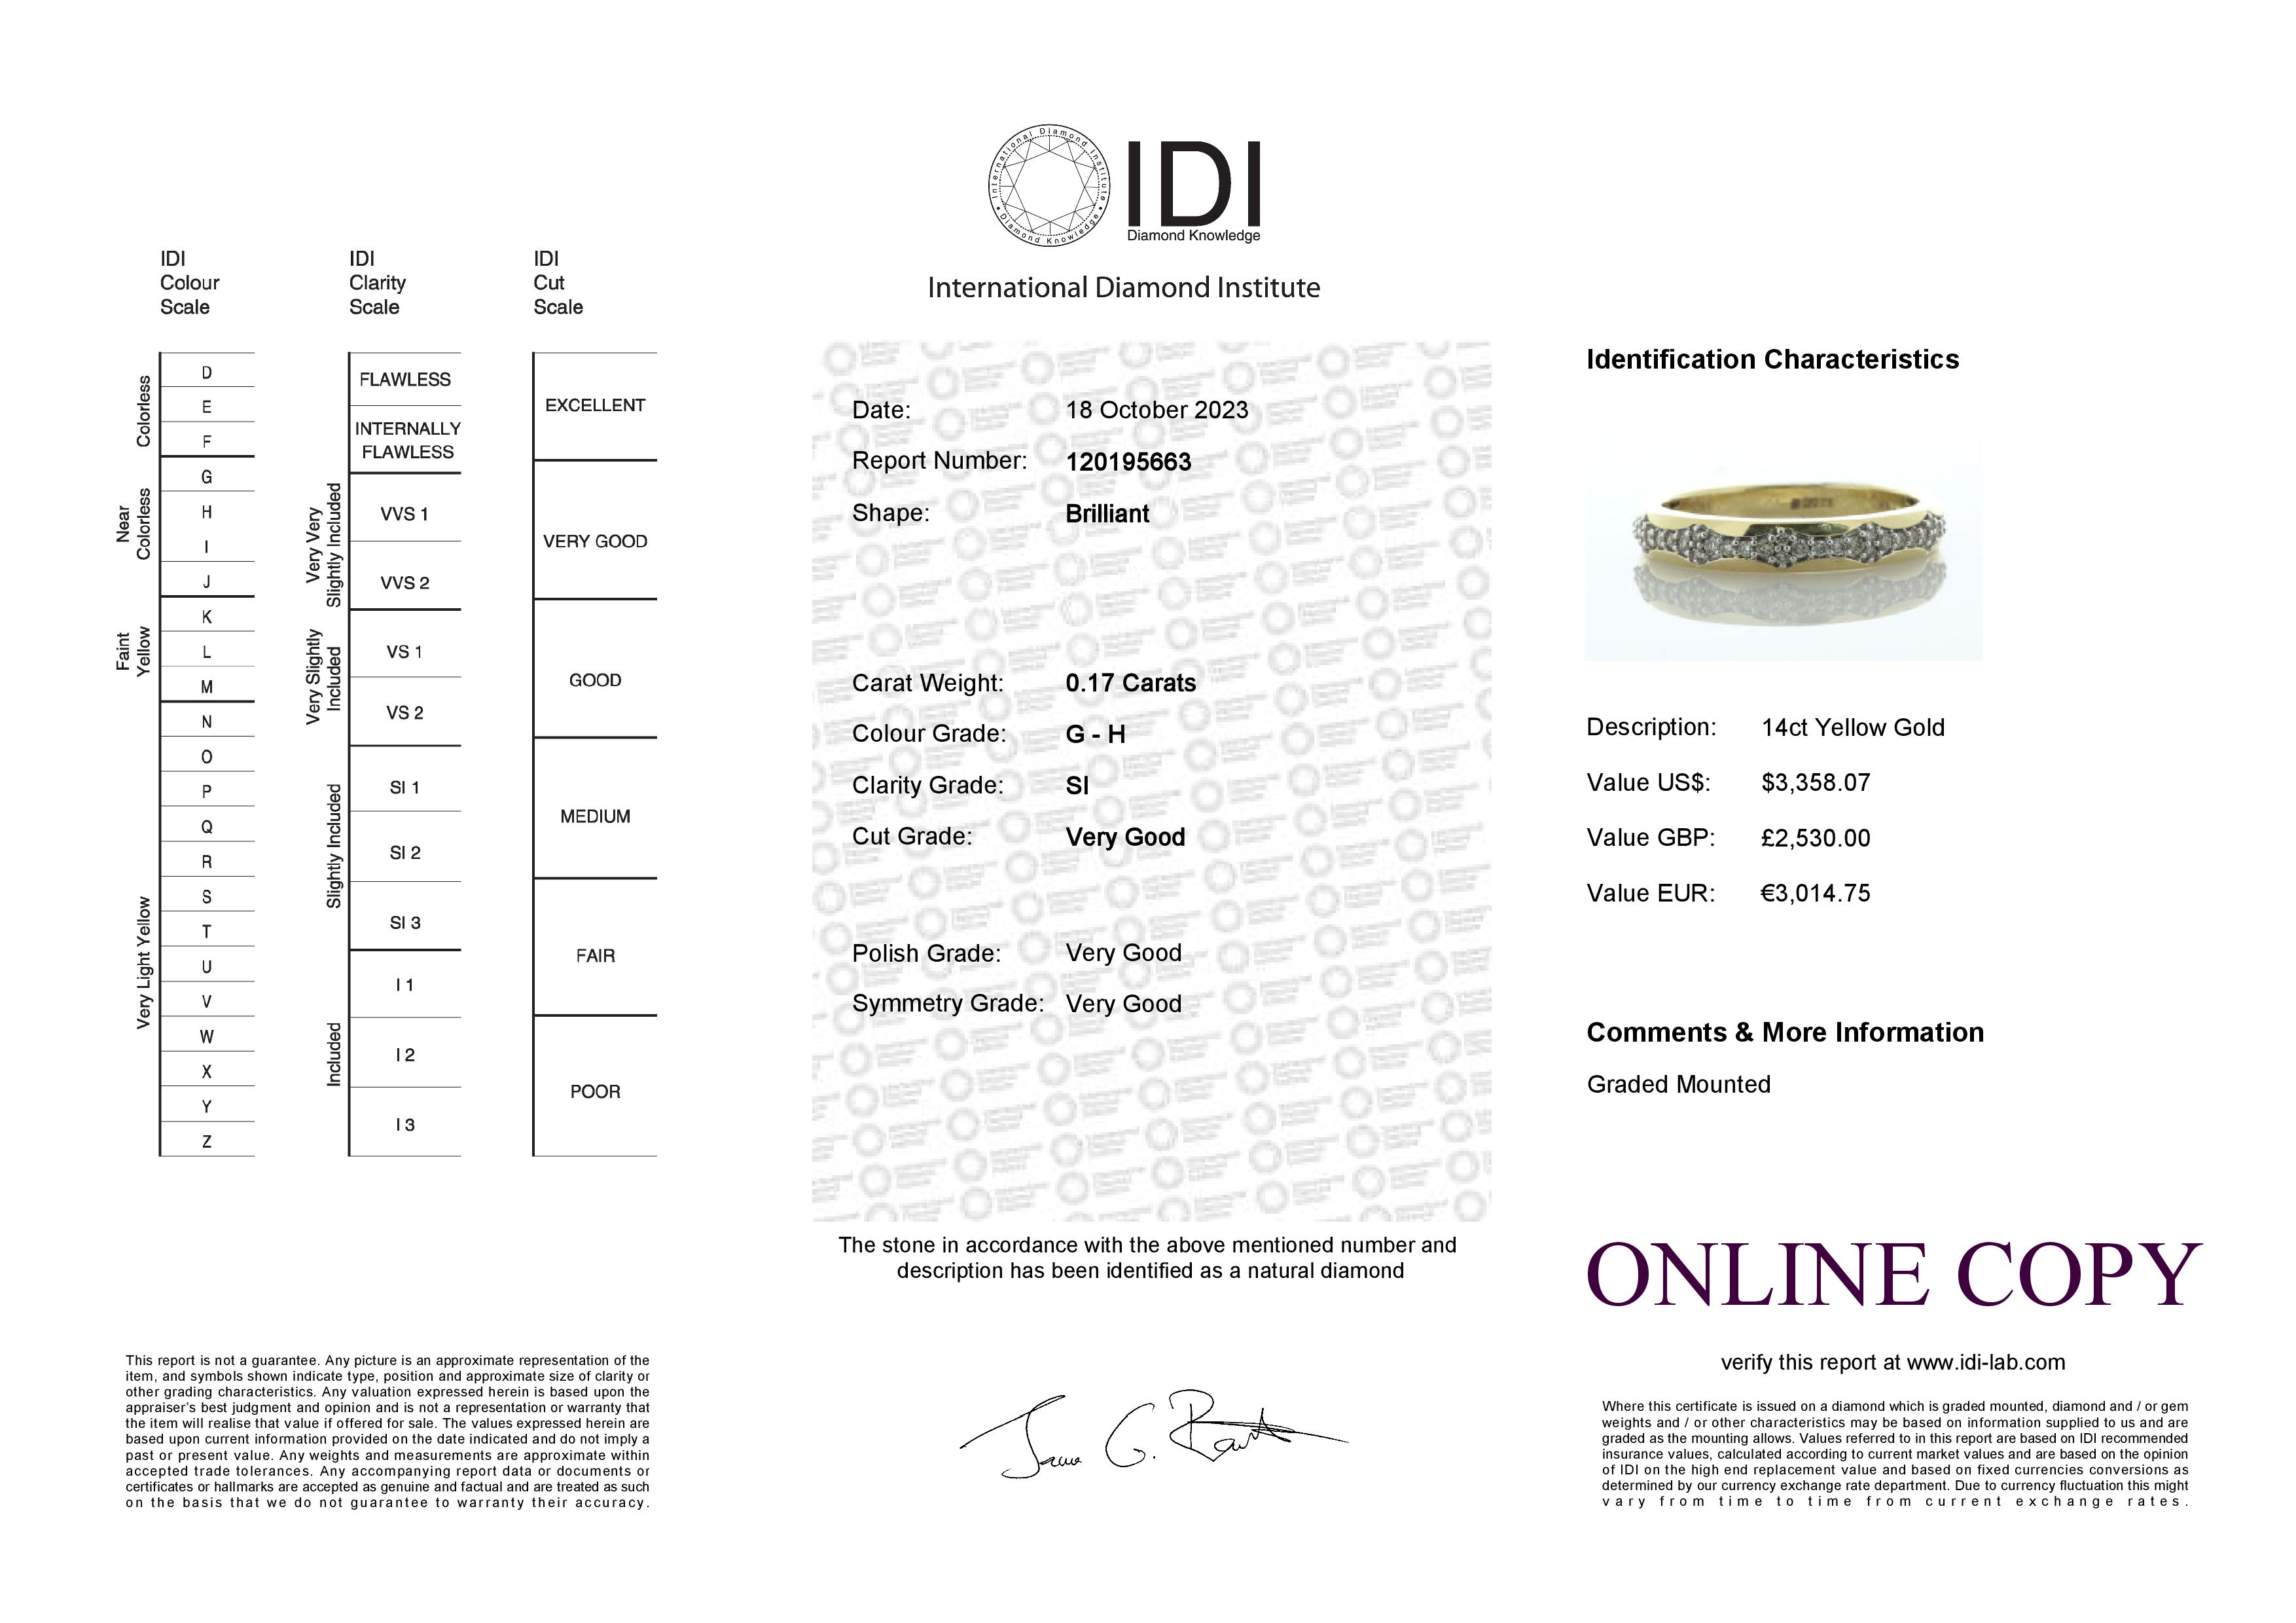 14ct Yellow Gold Illusion Set Semi Eternity Diamond Ring 0.17 Carats - Valued By IDI £2,530.00 - A - Image 4 of 4